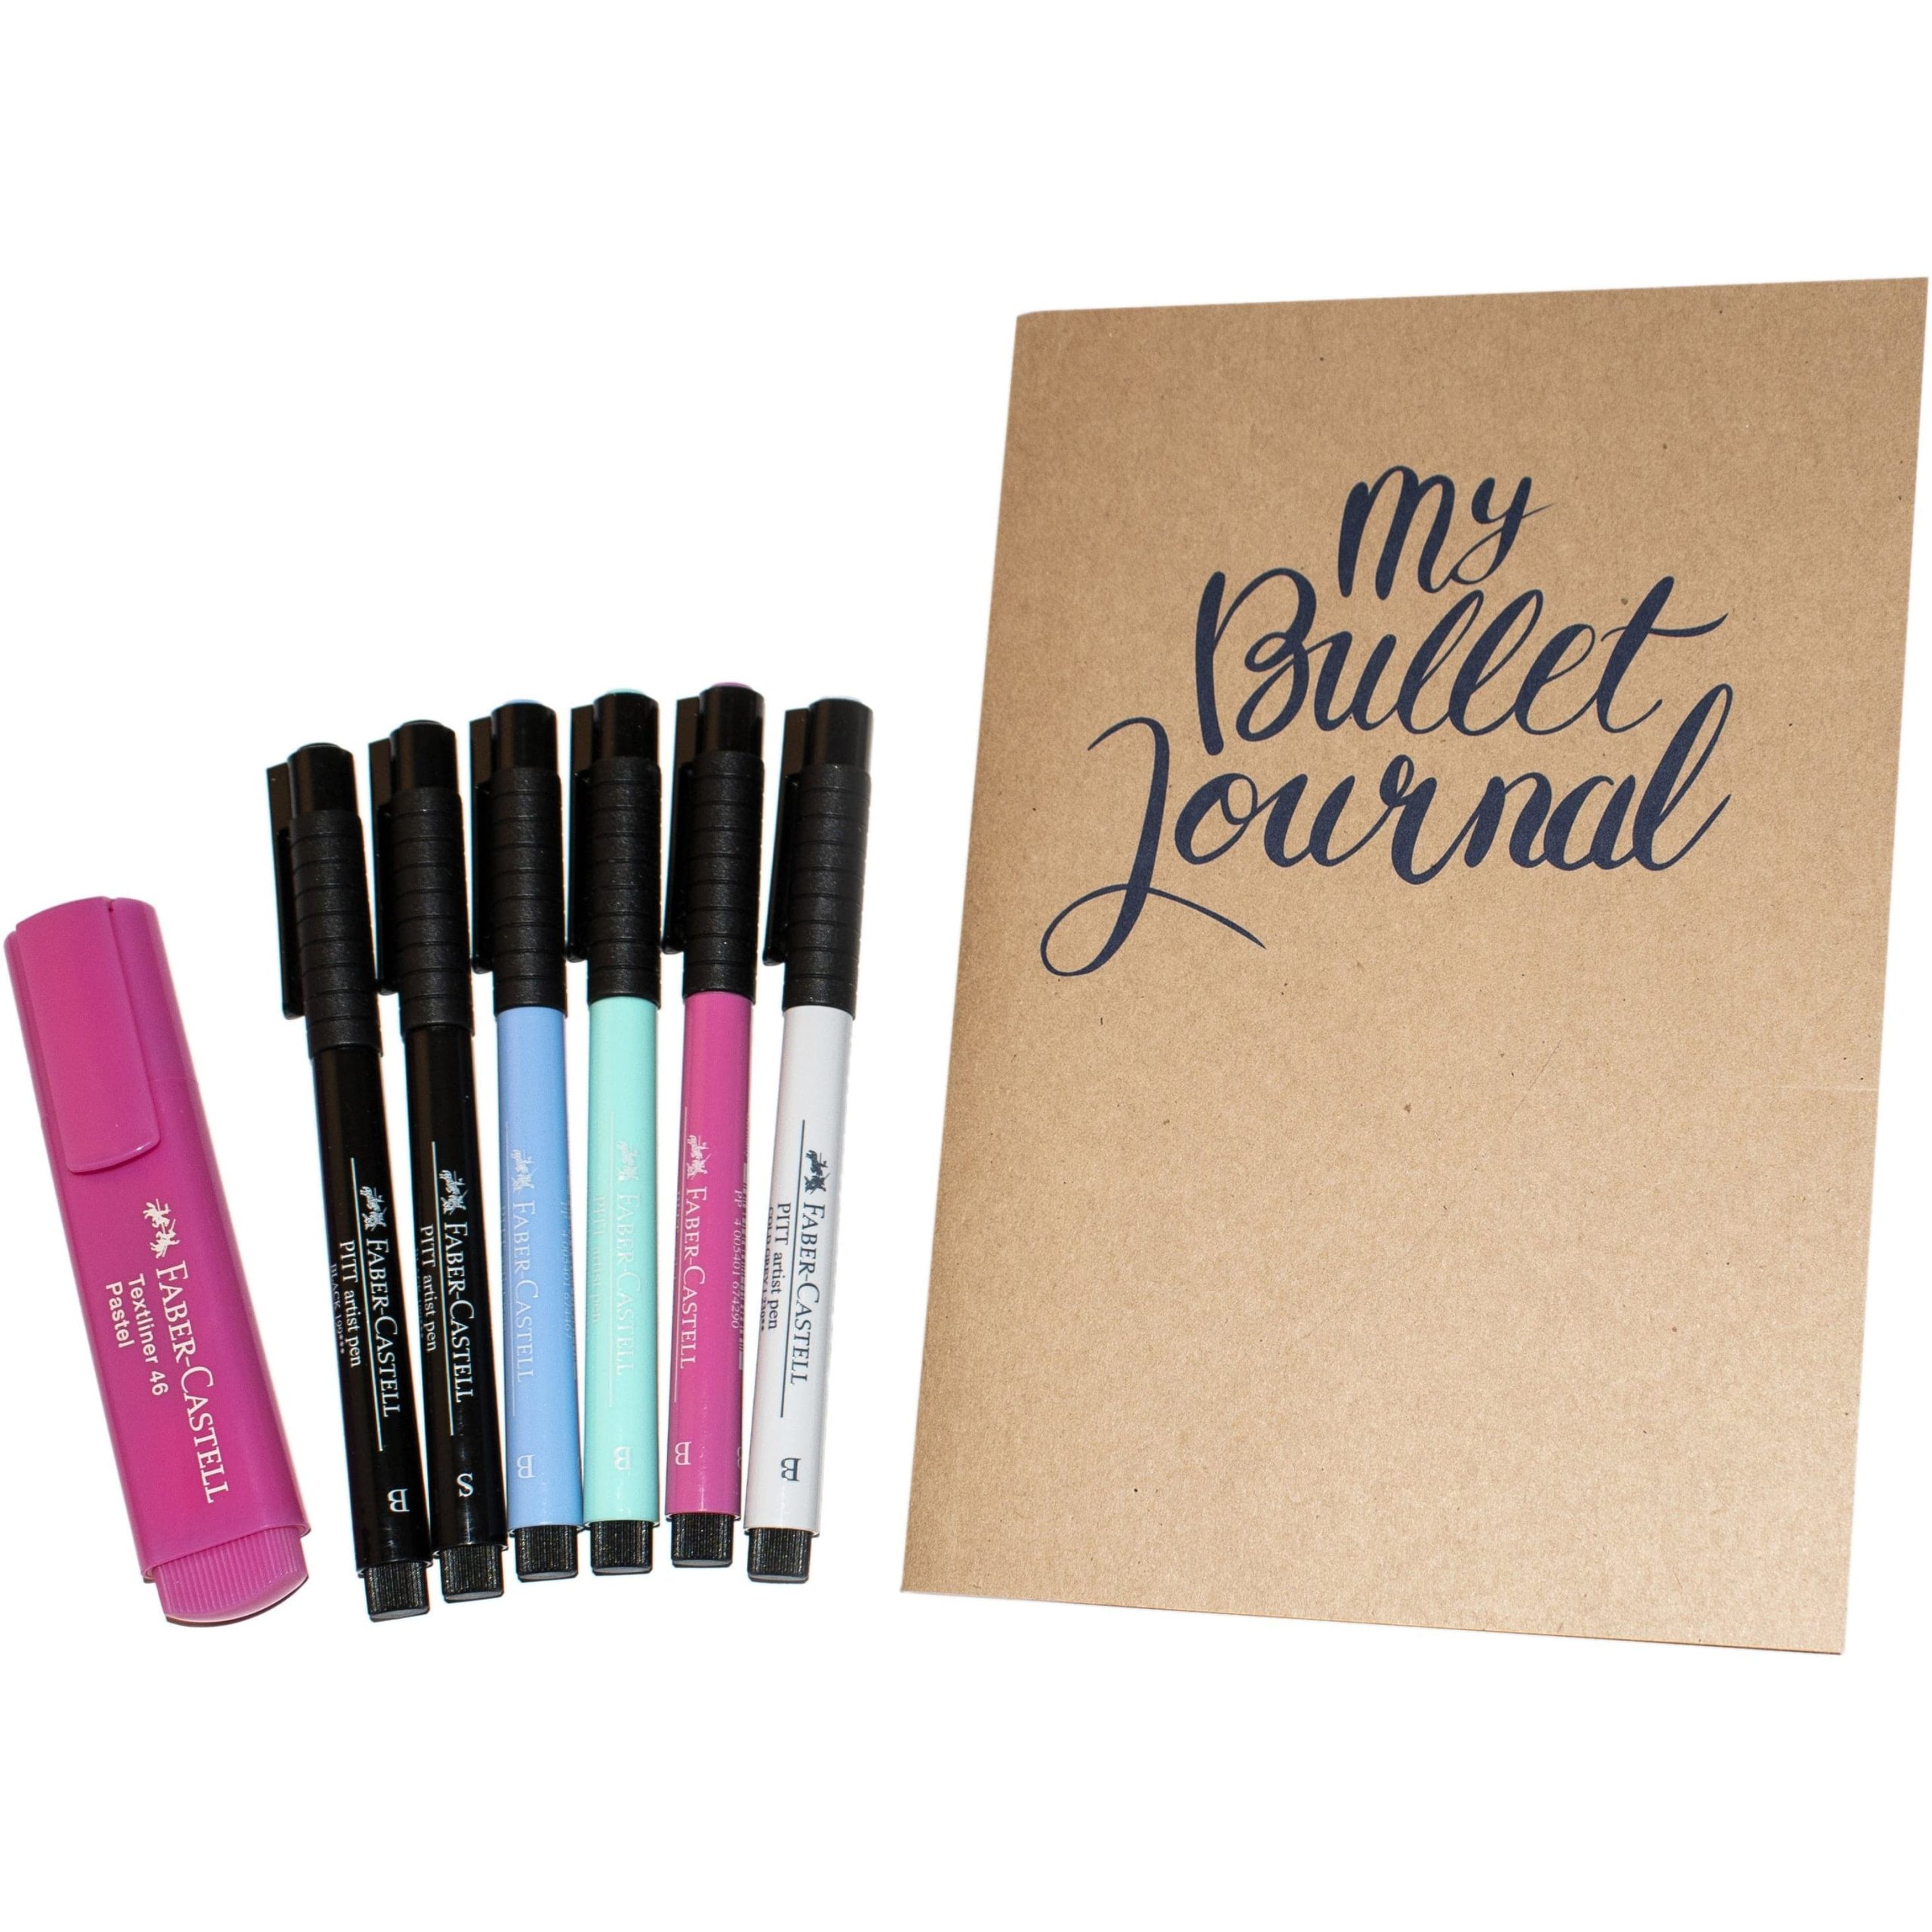 https://www.shopriot.shop/wp-content/uploads/1689/10/now-you-can-shop-the-latest-collections-from-faber-castell-bullet-journaling-starter-set-set-of-9-159_6-scaled.jpg